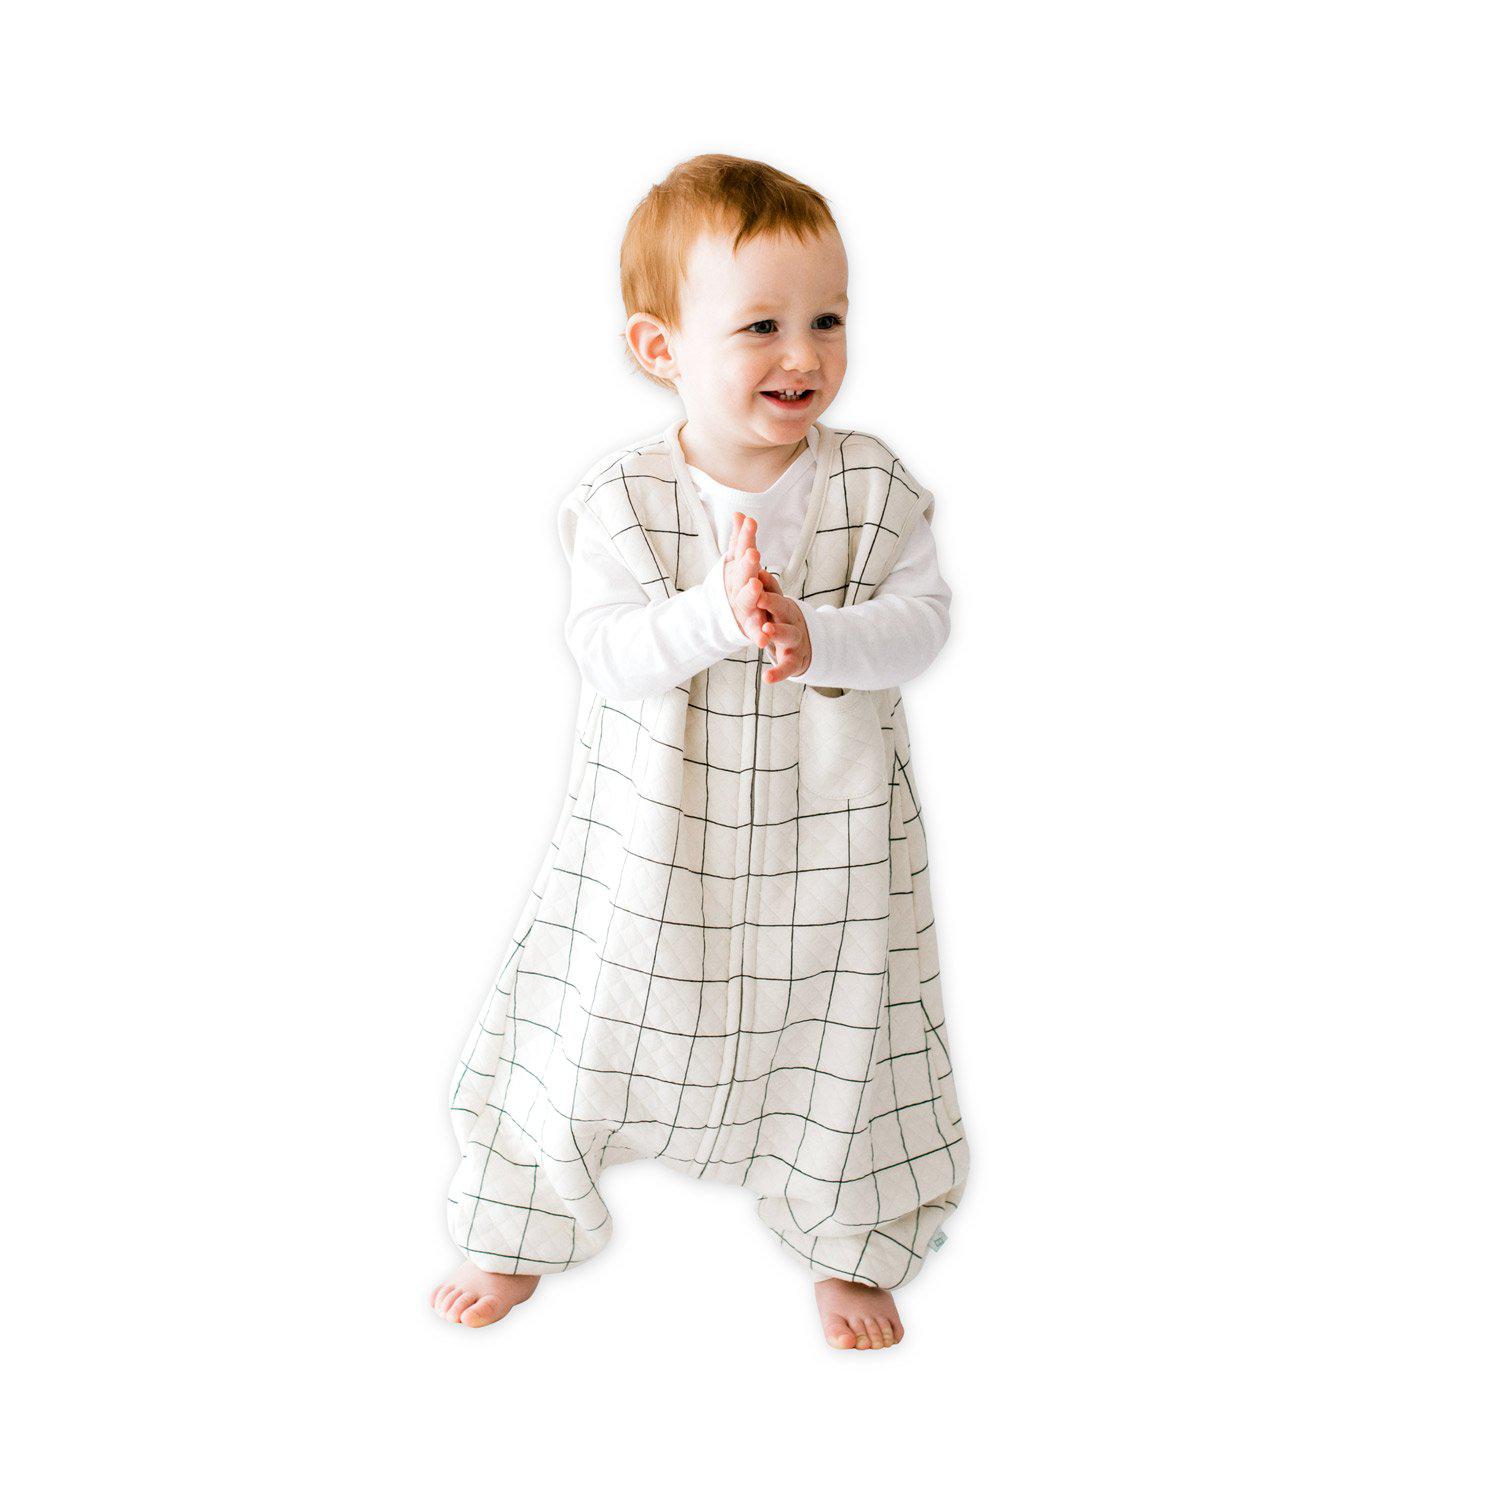 Baby wearing Tealbee Dreamsuit Checkered 0.8 TOG Available sizes from 12m to 4T